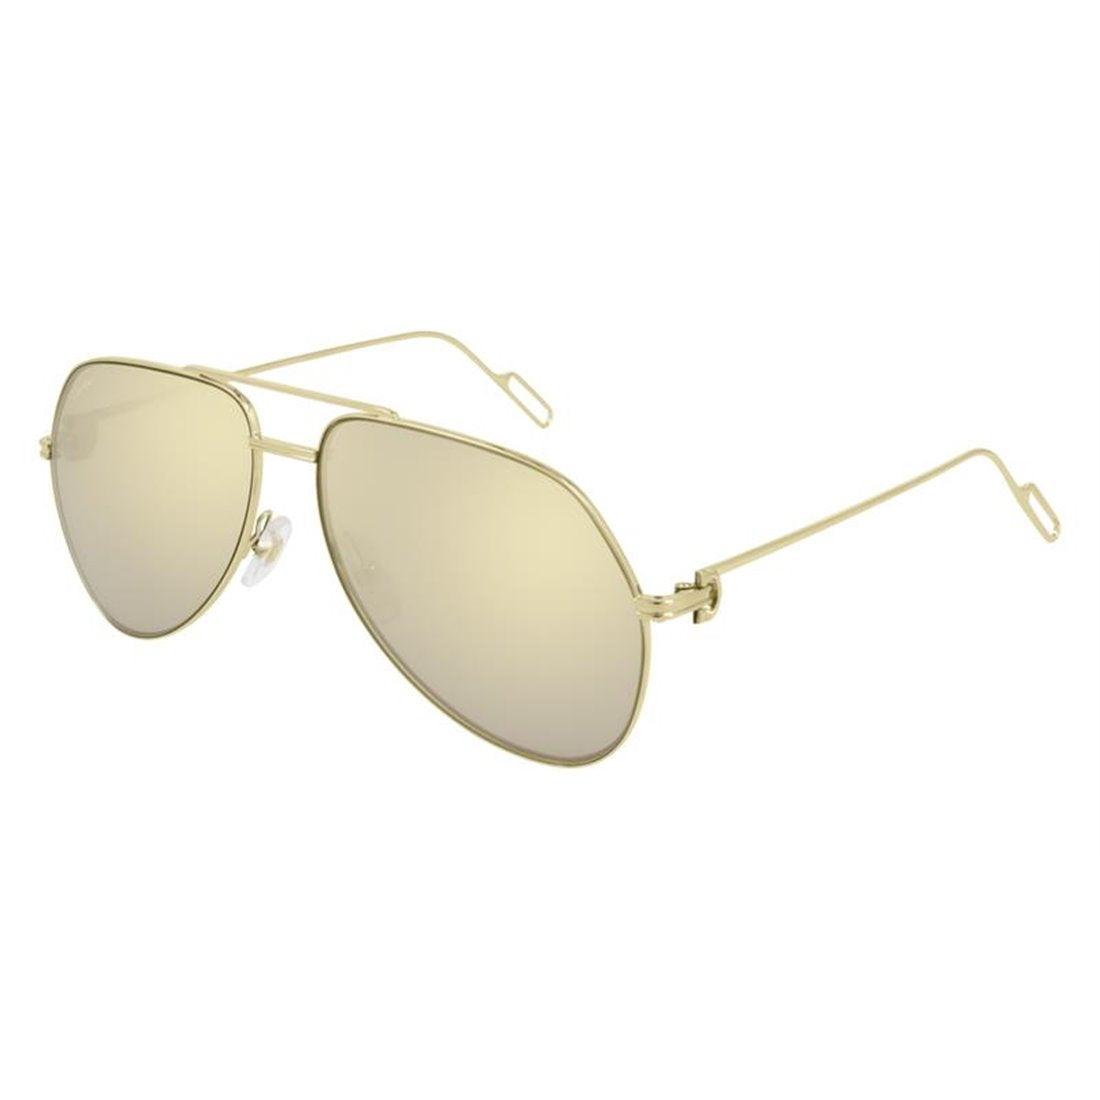 CARTIER Stylish Unisex Sunglasses in Indeterminate Color for the Fashion-Forward